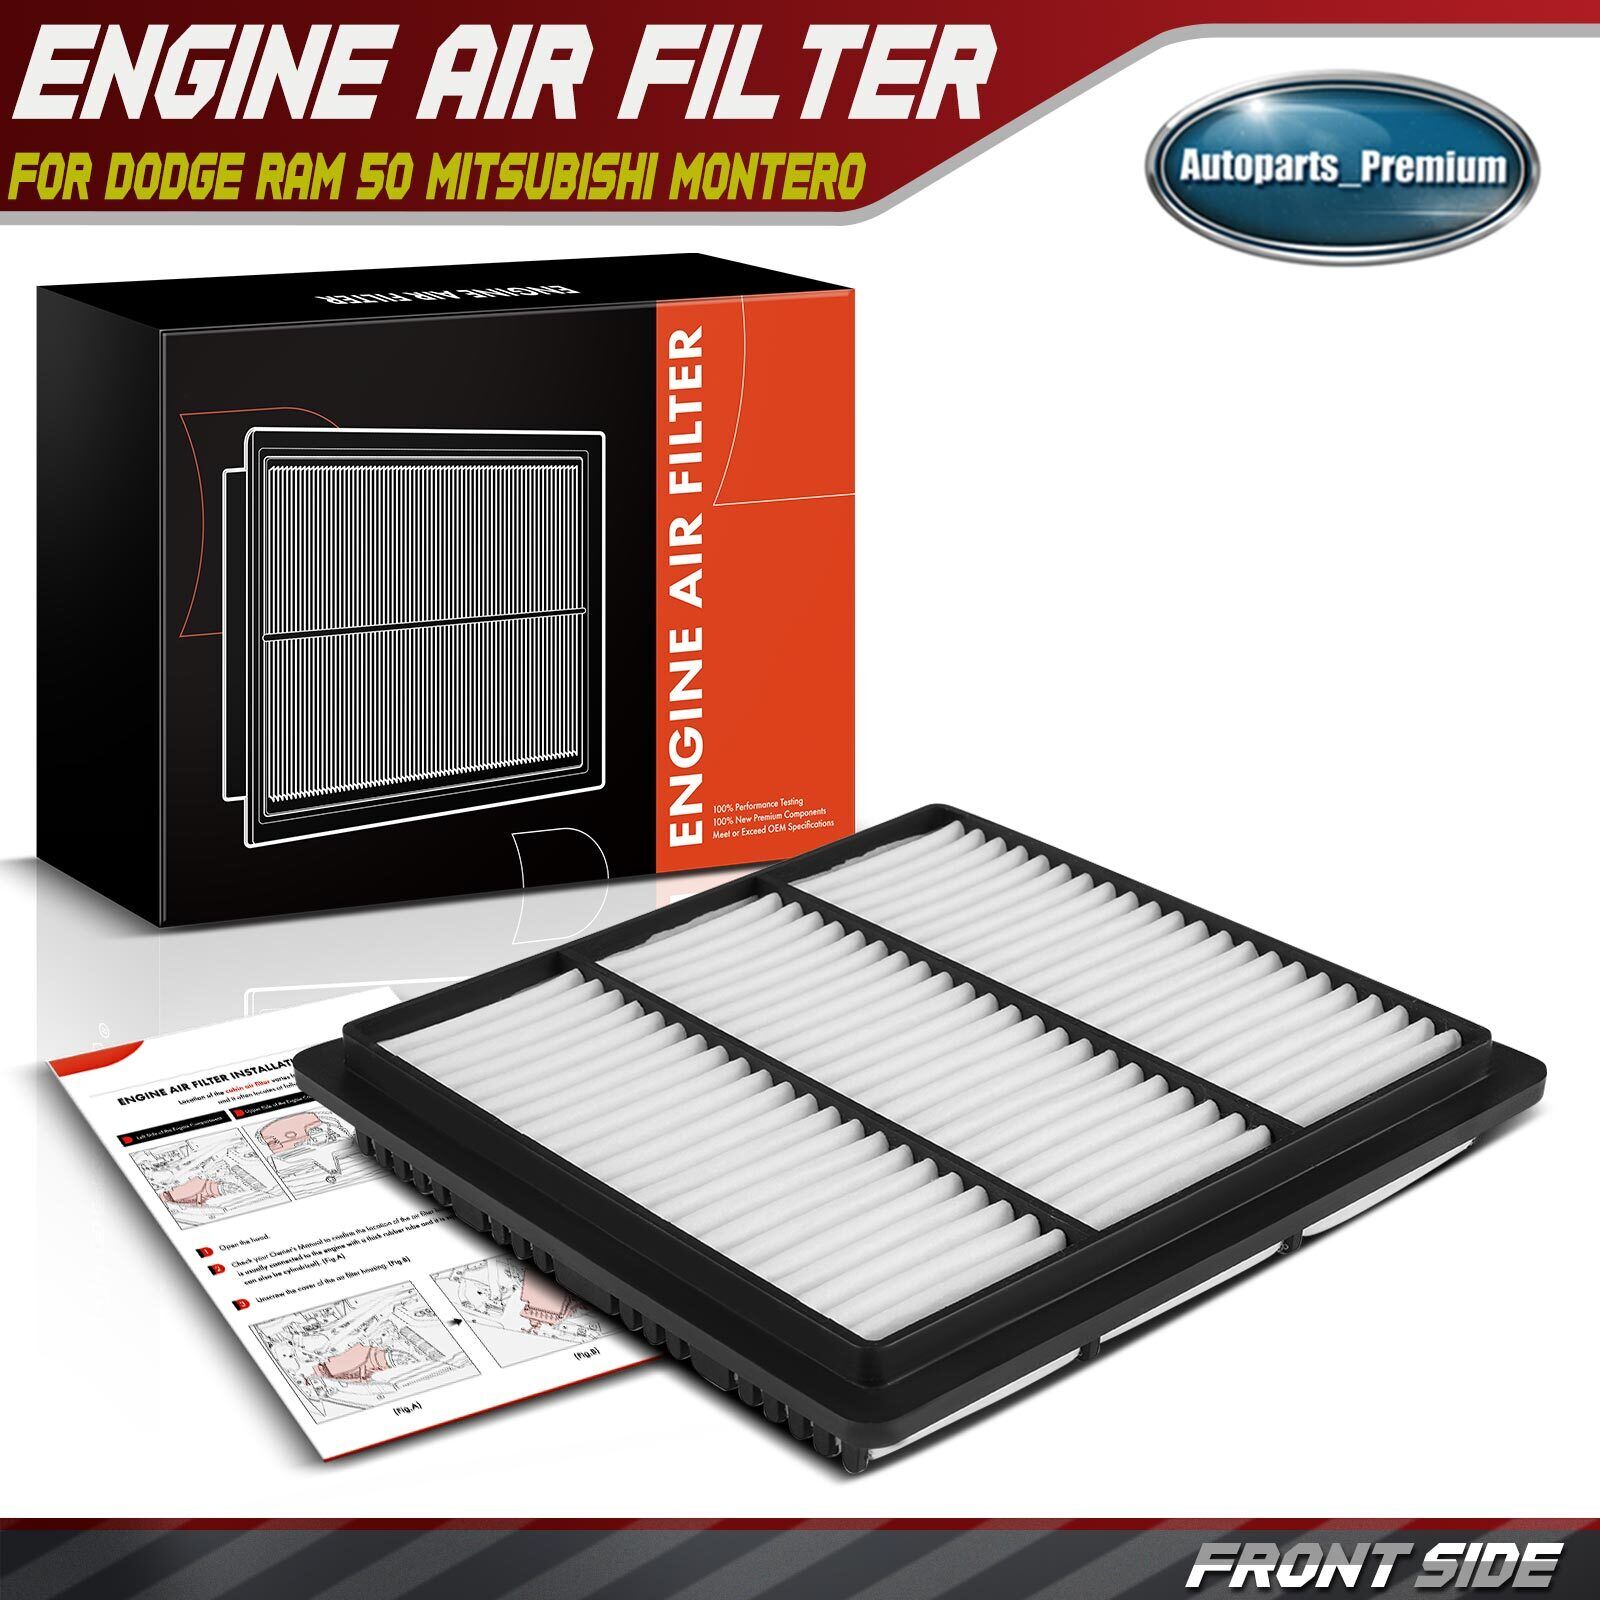 Engine Air Filter for Dodge Ram 50 Stealth Mitsubishi Montero 3000GT Mighty Max